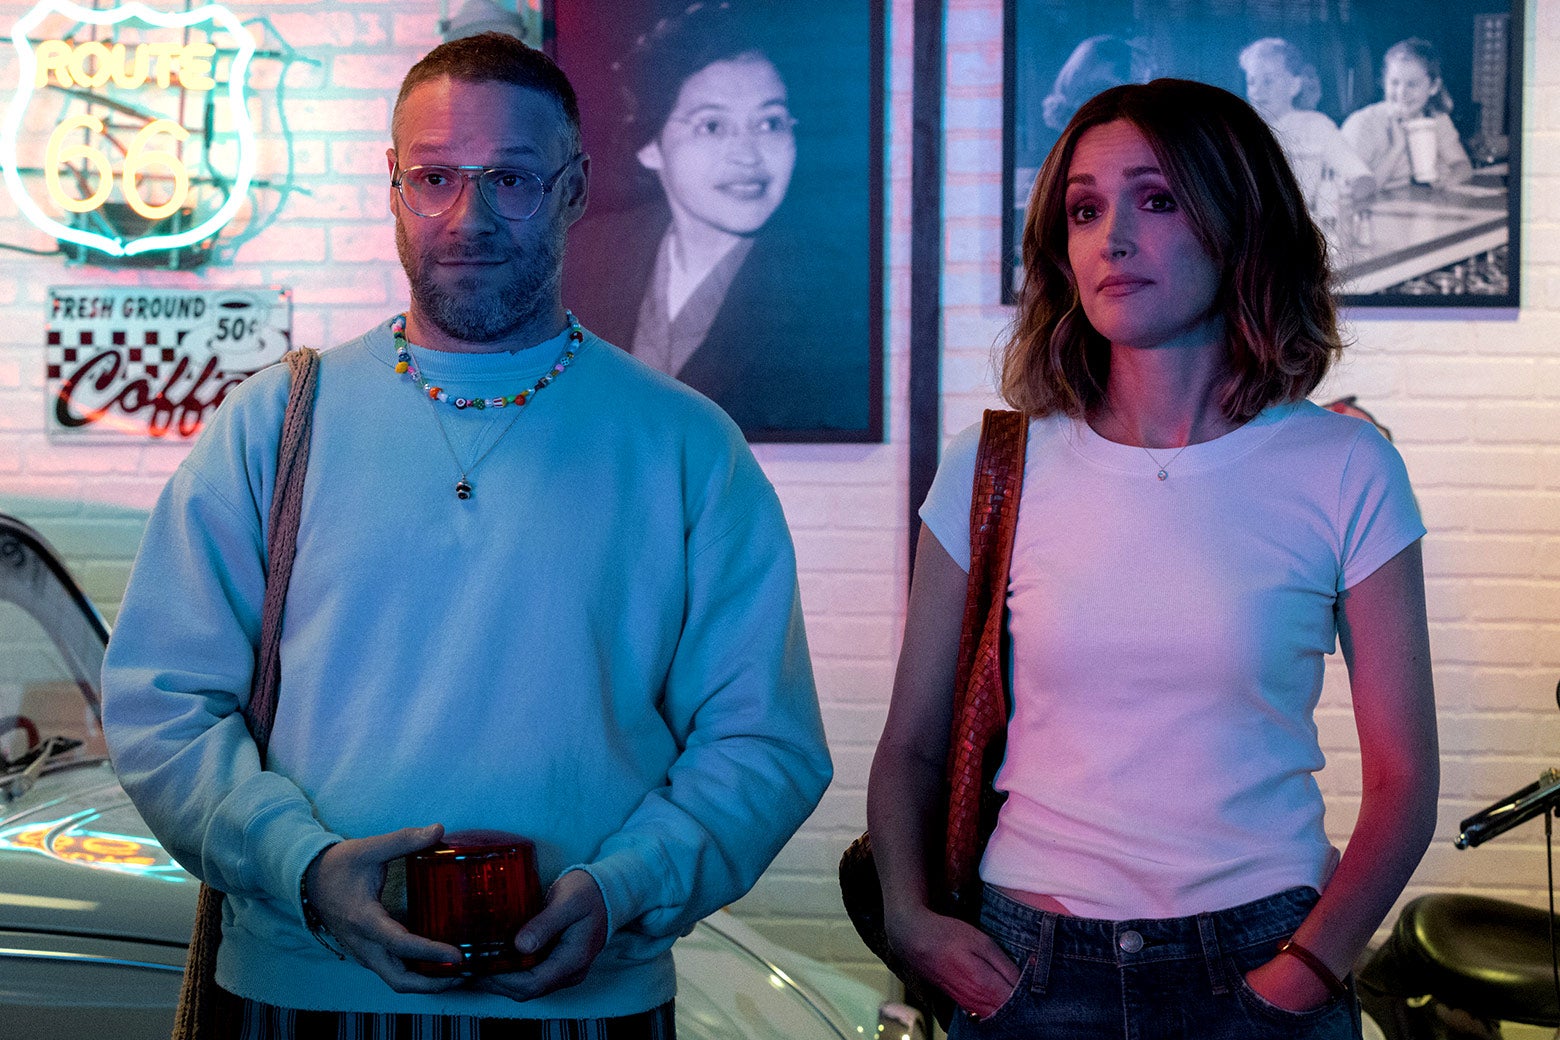 A middle-aged white man in glasses, who's wearing a plain blue sweatshirt with a child-created rainbow-bead necklace, stands next to a middle-aged white woman wearing a white T-shirt as both stare ahead. Neither looks impressed.